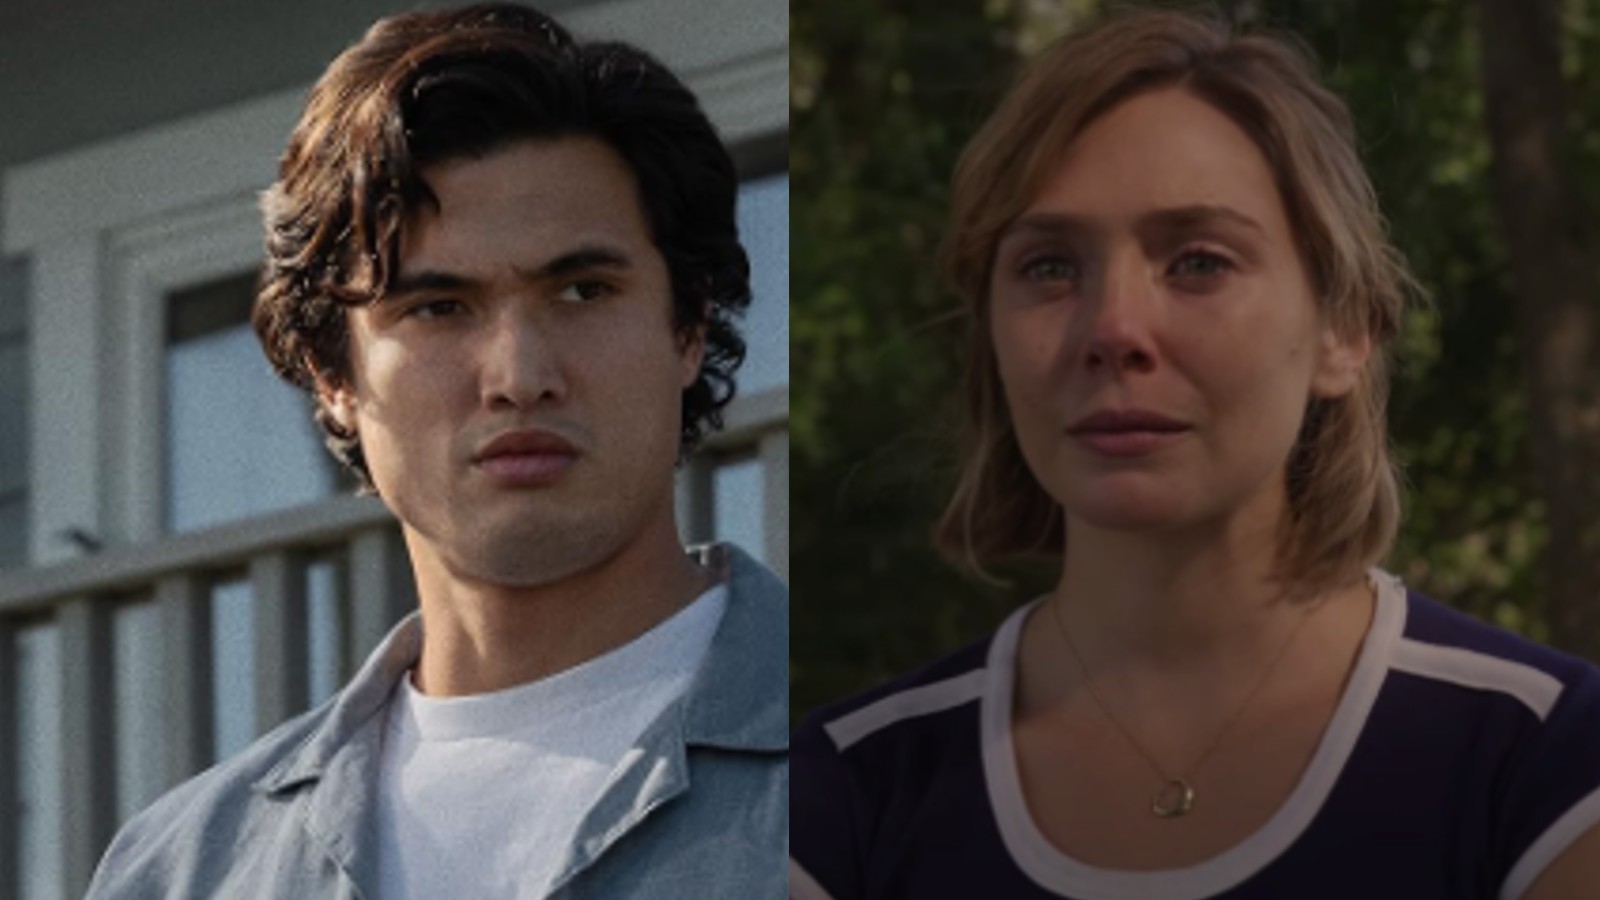 Charles Melton is ready for another romance movie with Elizabeth Olsen